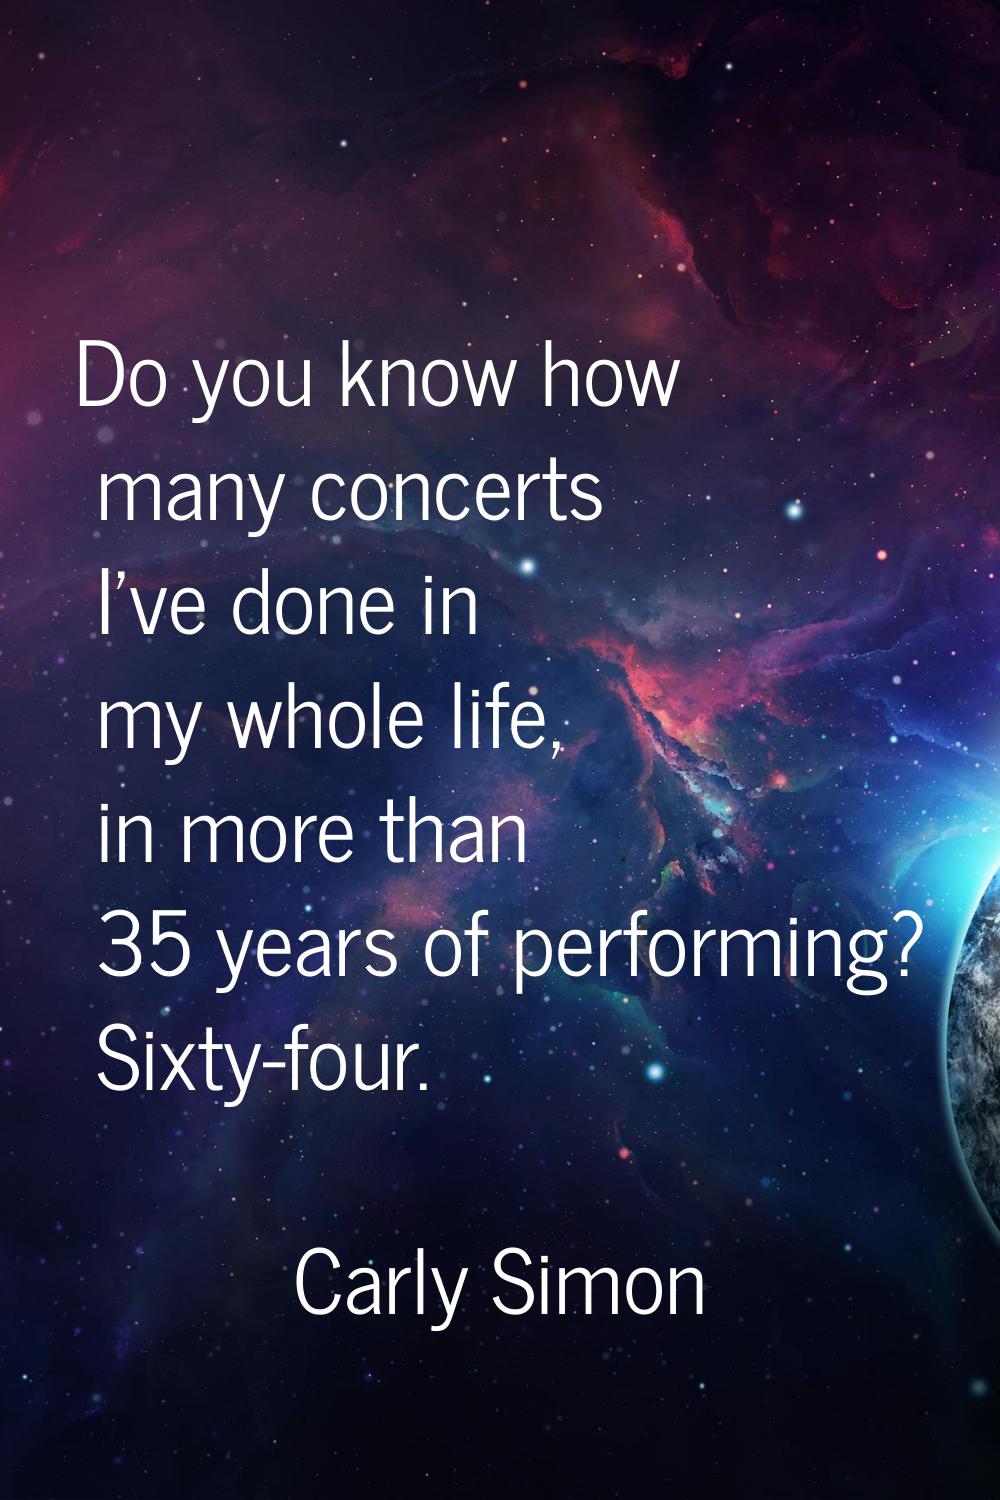 Do you know how many concerts I've done in my whole life, in more than 35 years of performing? Sixt